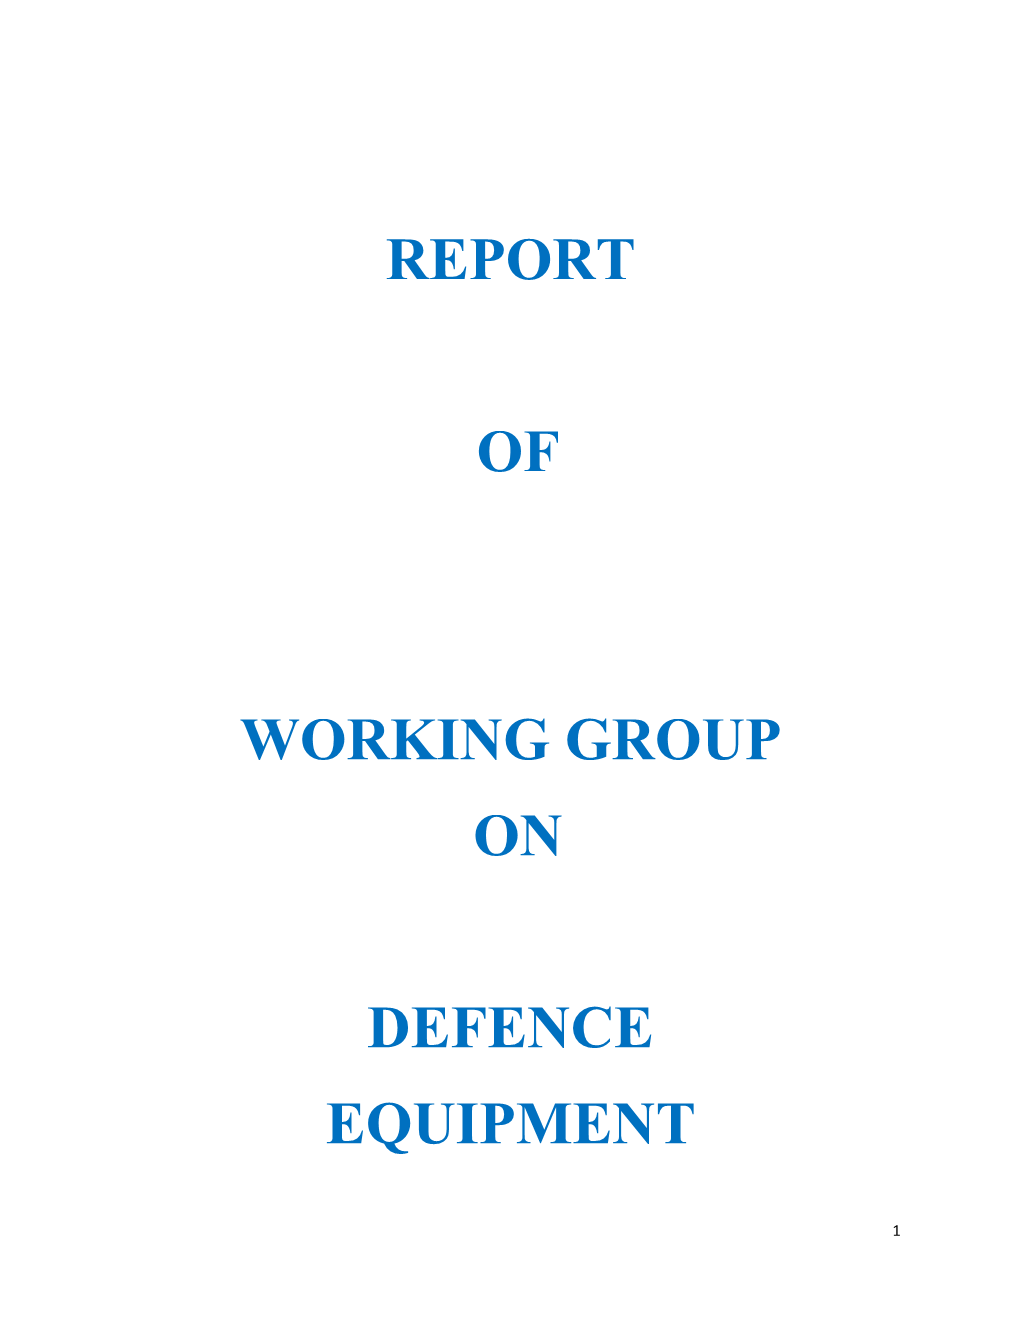 Report of Working Group on Defence Equipment